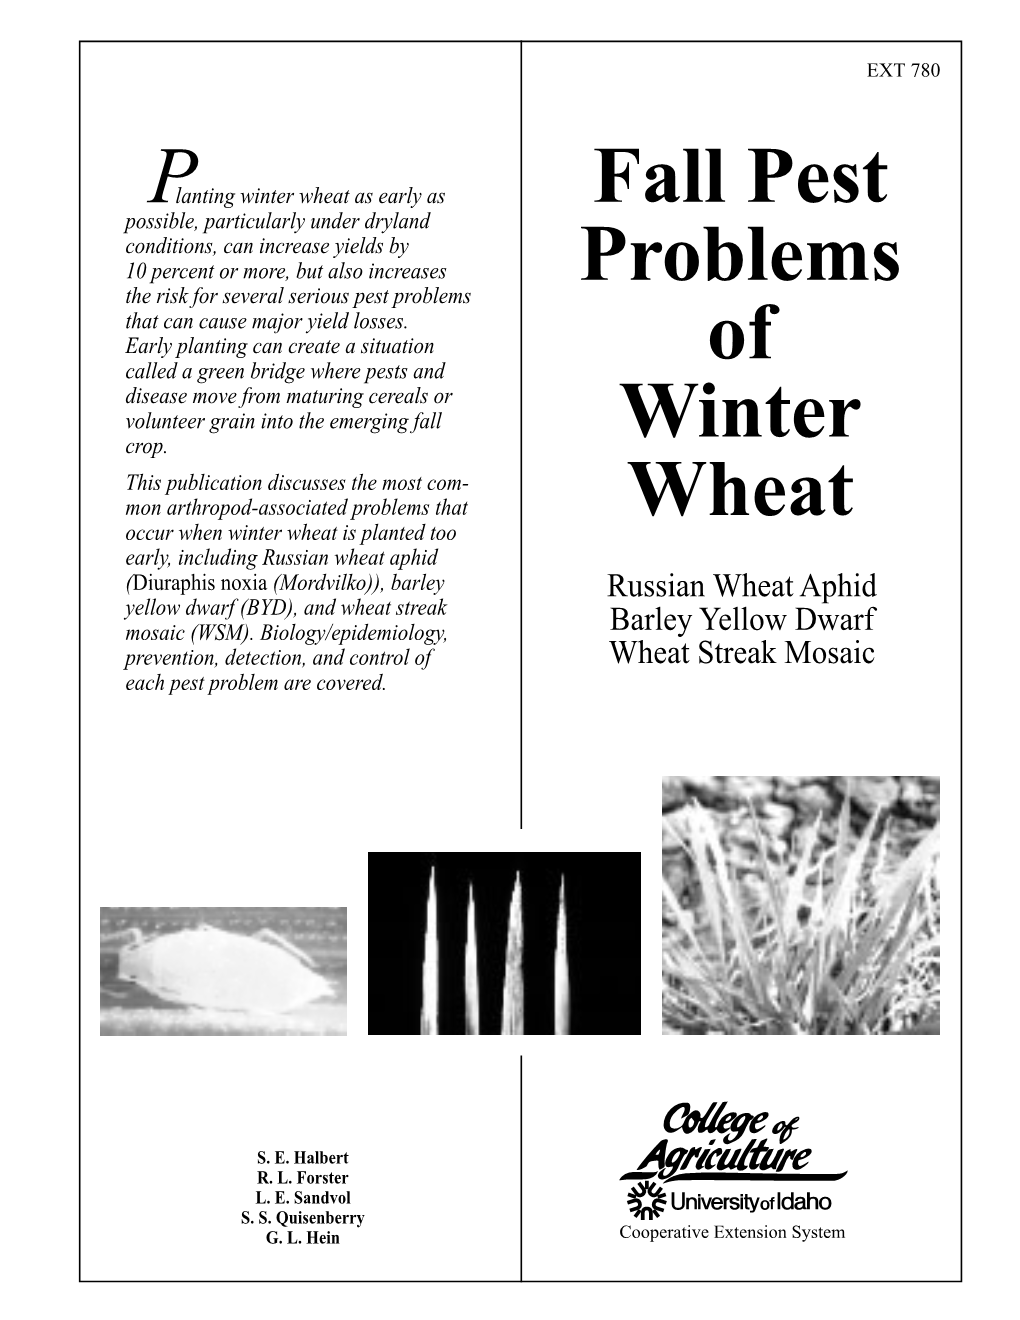 Fall Pest Problems of Winter Wheat